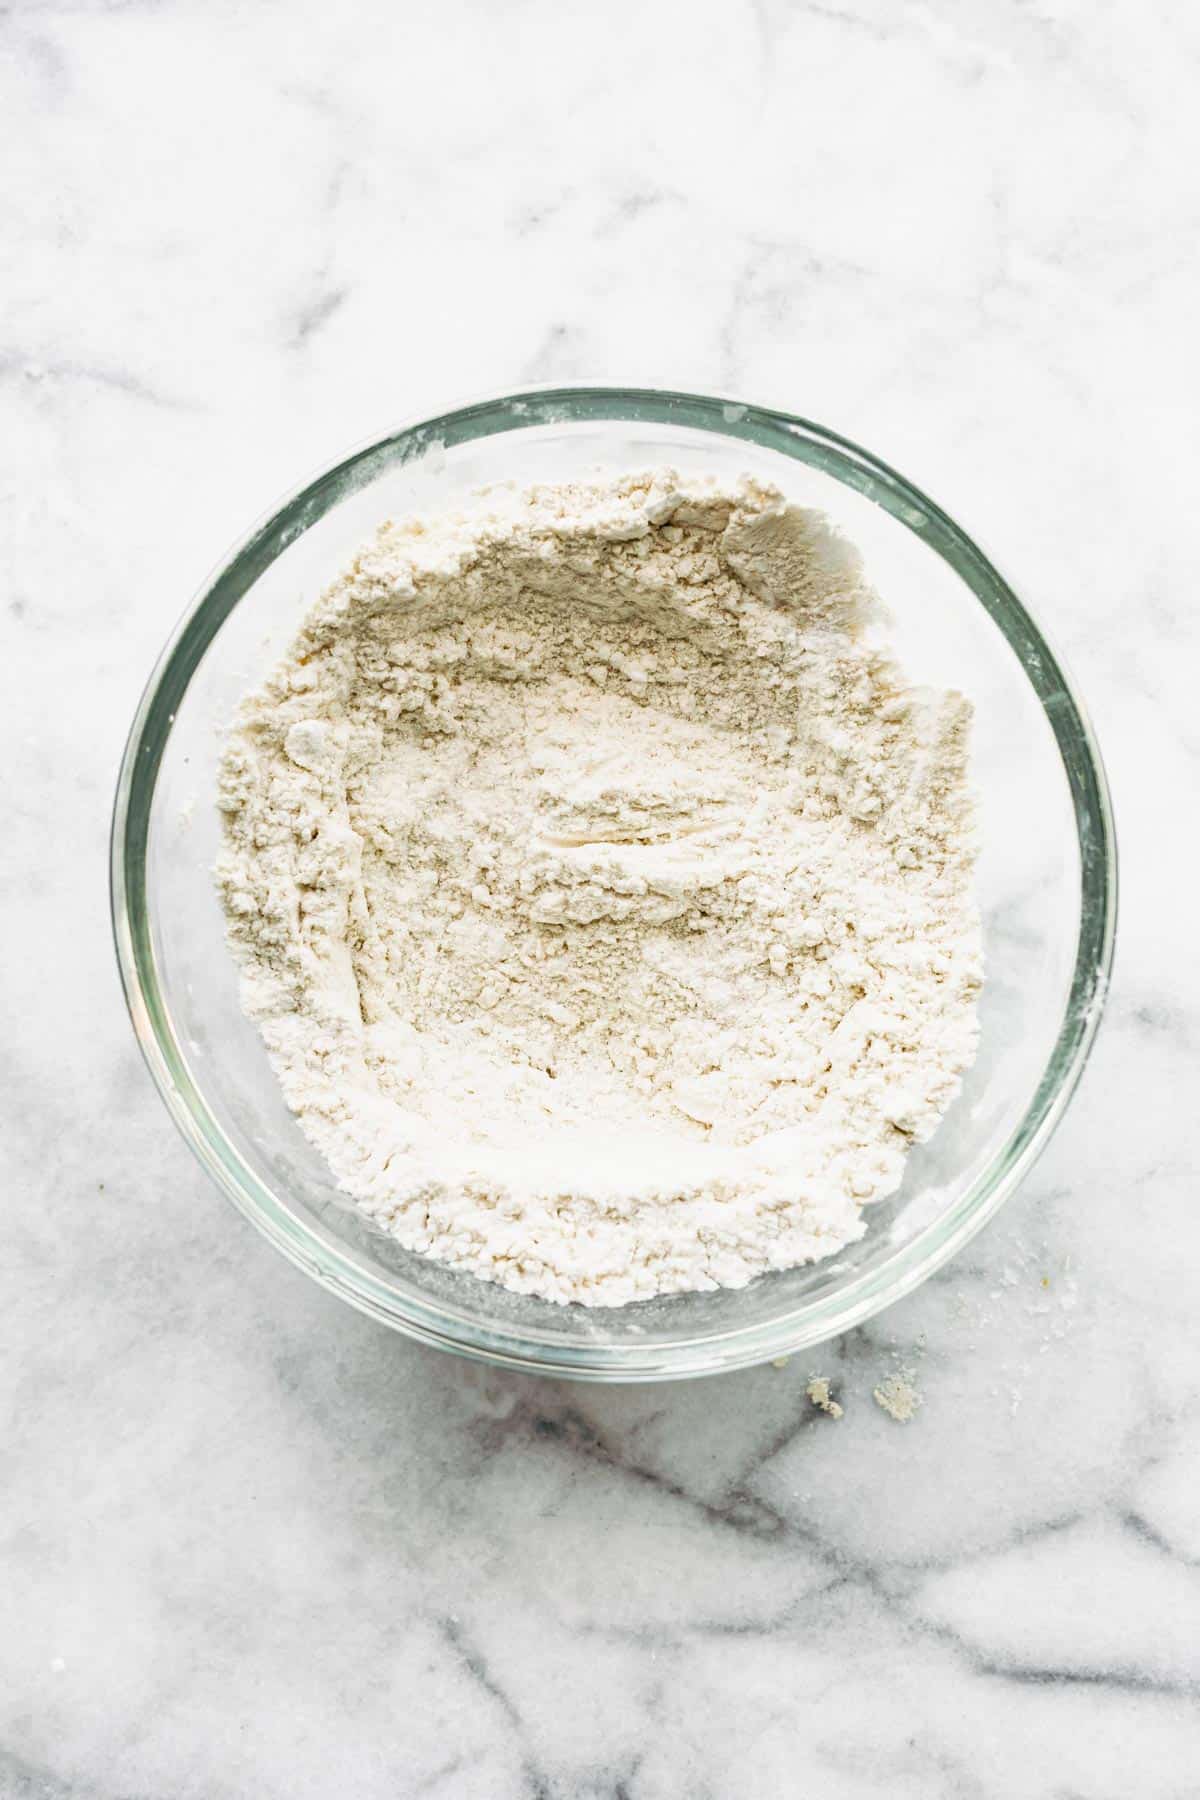 A clear glass bowl filled with a homemade gluten free flour blend.